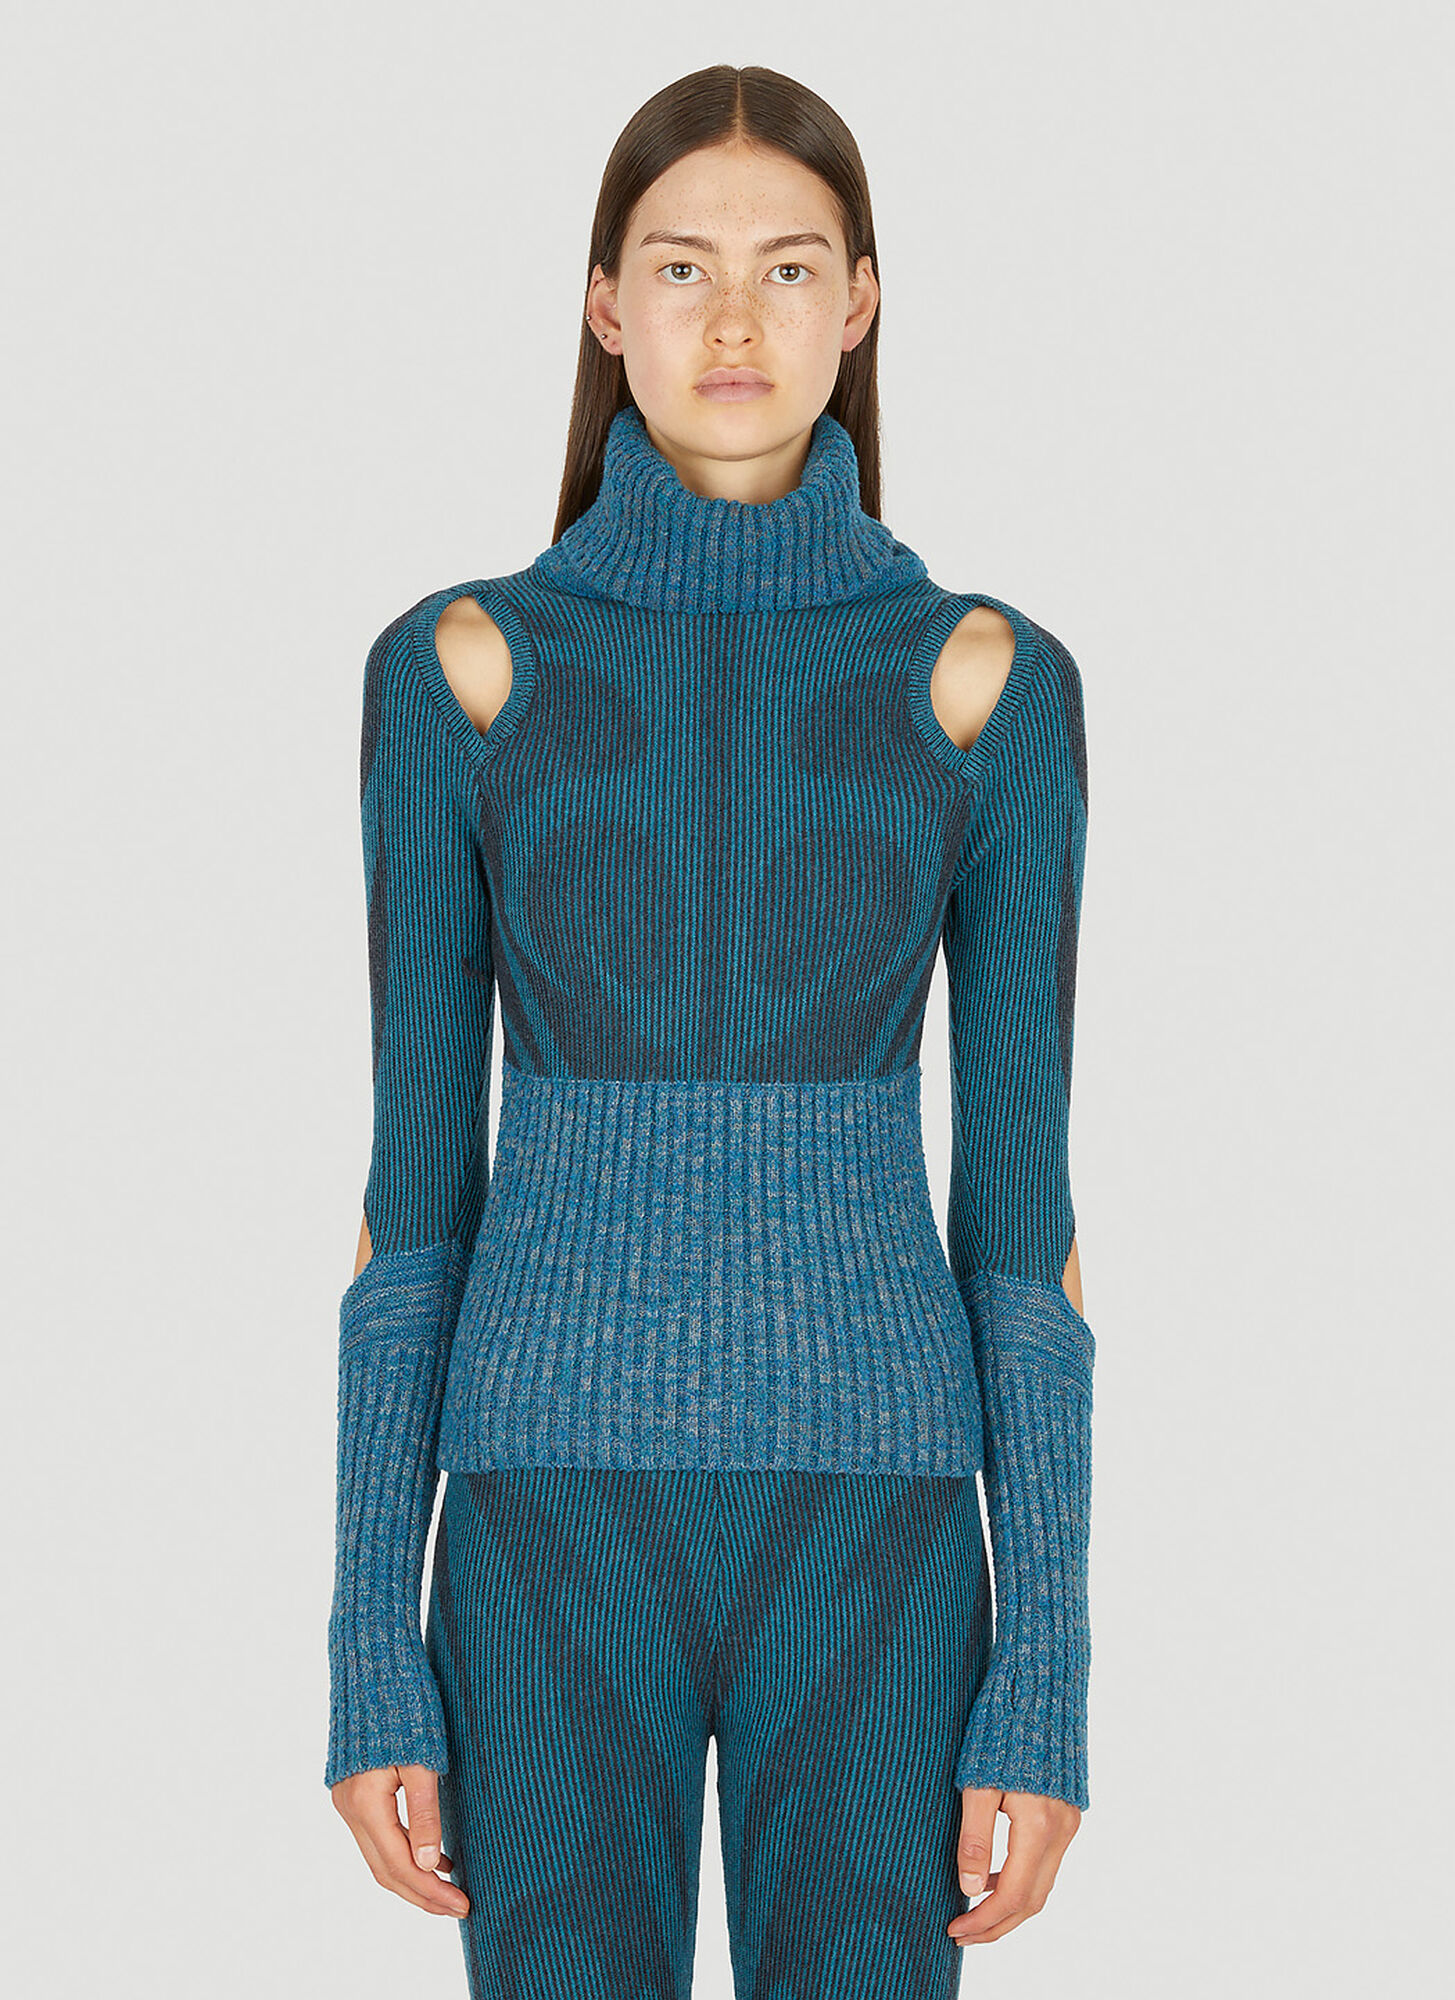 PAOLINA RUSSO ILLUSION KNIT CUT OUT SWEATER